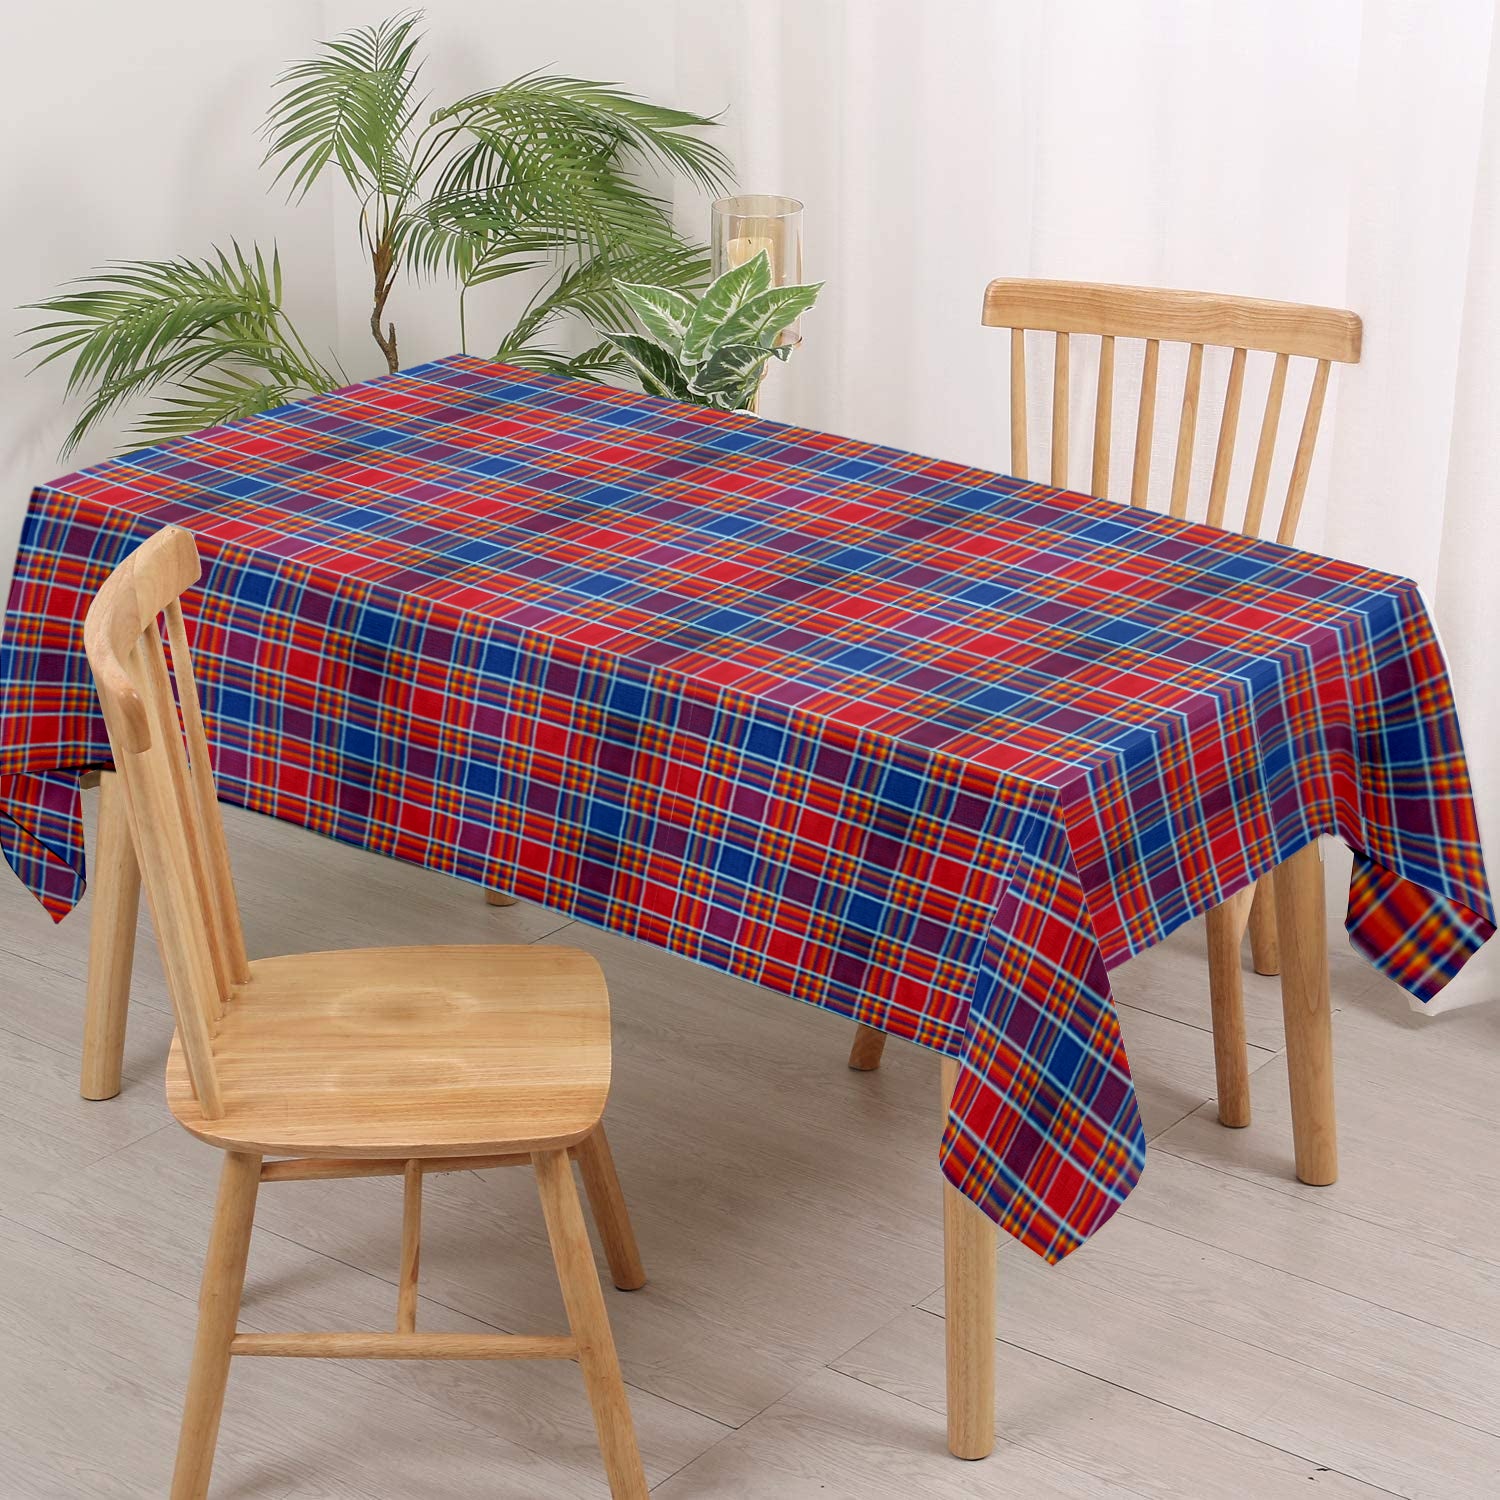 Lushomes table cloth Cotton, dining table cover 6 seater, table cloth for 6 seater dining table, Rectangle dining cover, Red Checks Table Cover with 1 Cms Hem (Pk of 1, Size: 60x84 Inch, 5x7 FT)